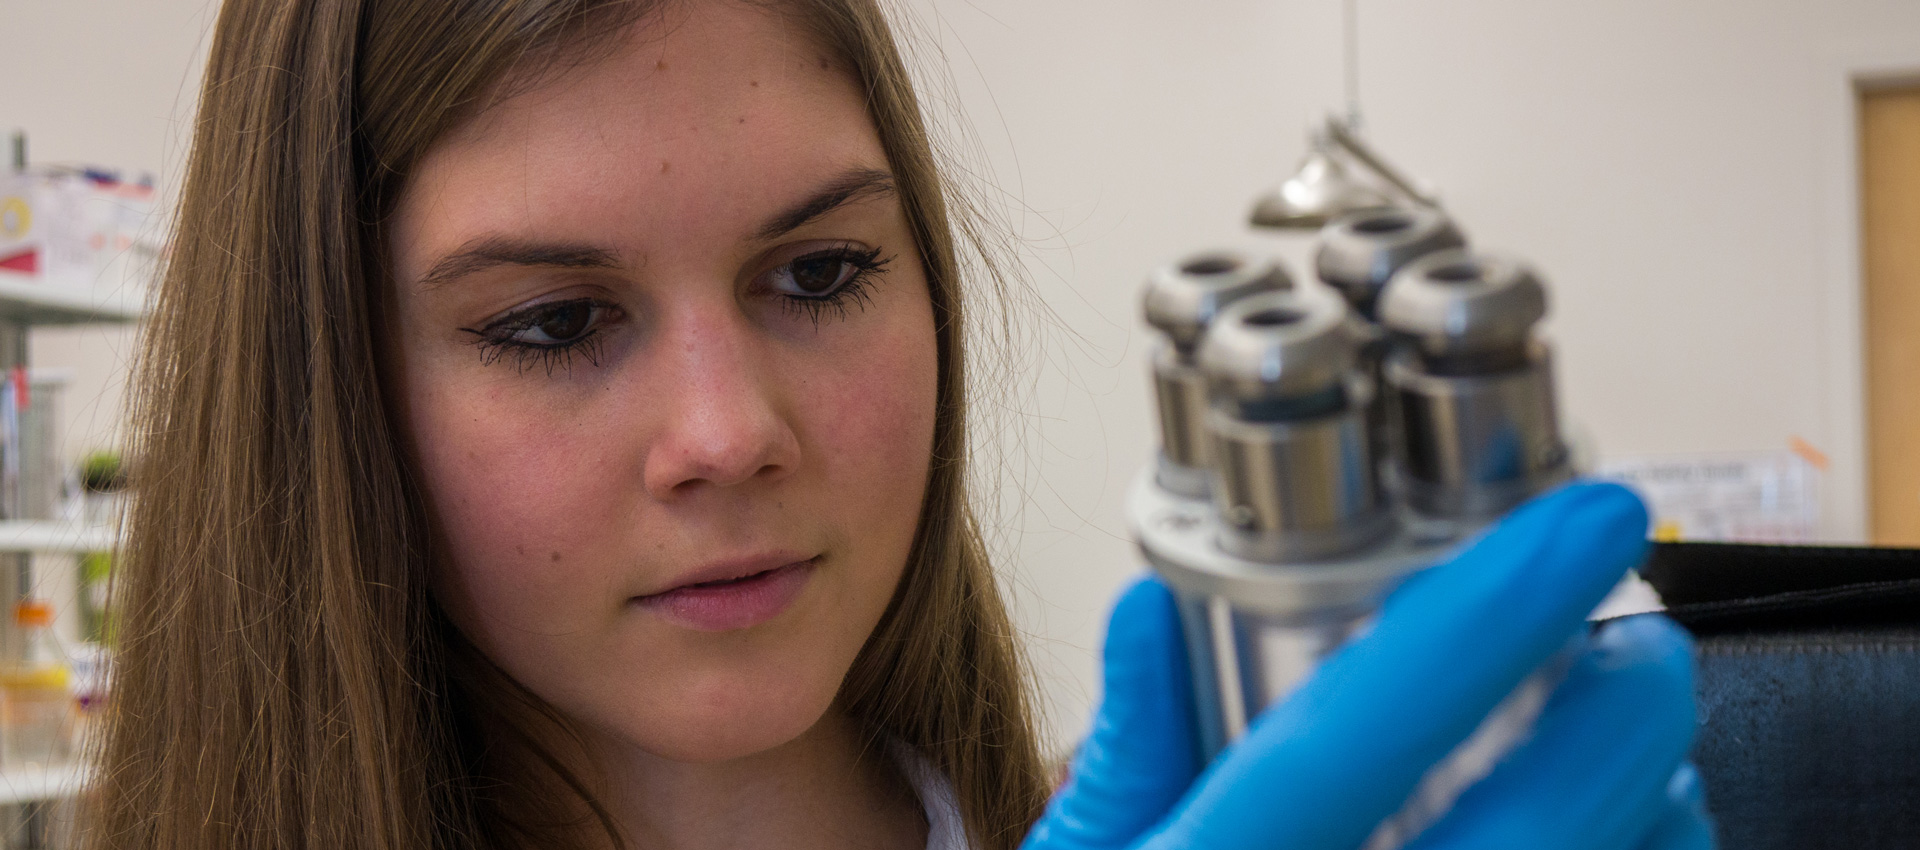 female student in lab holding small piece of equipment